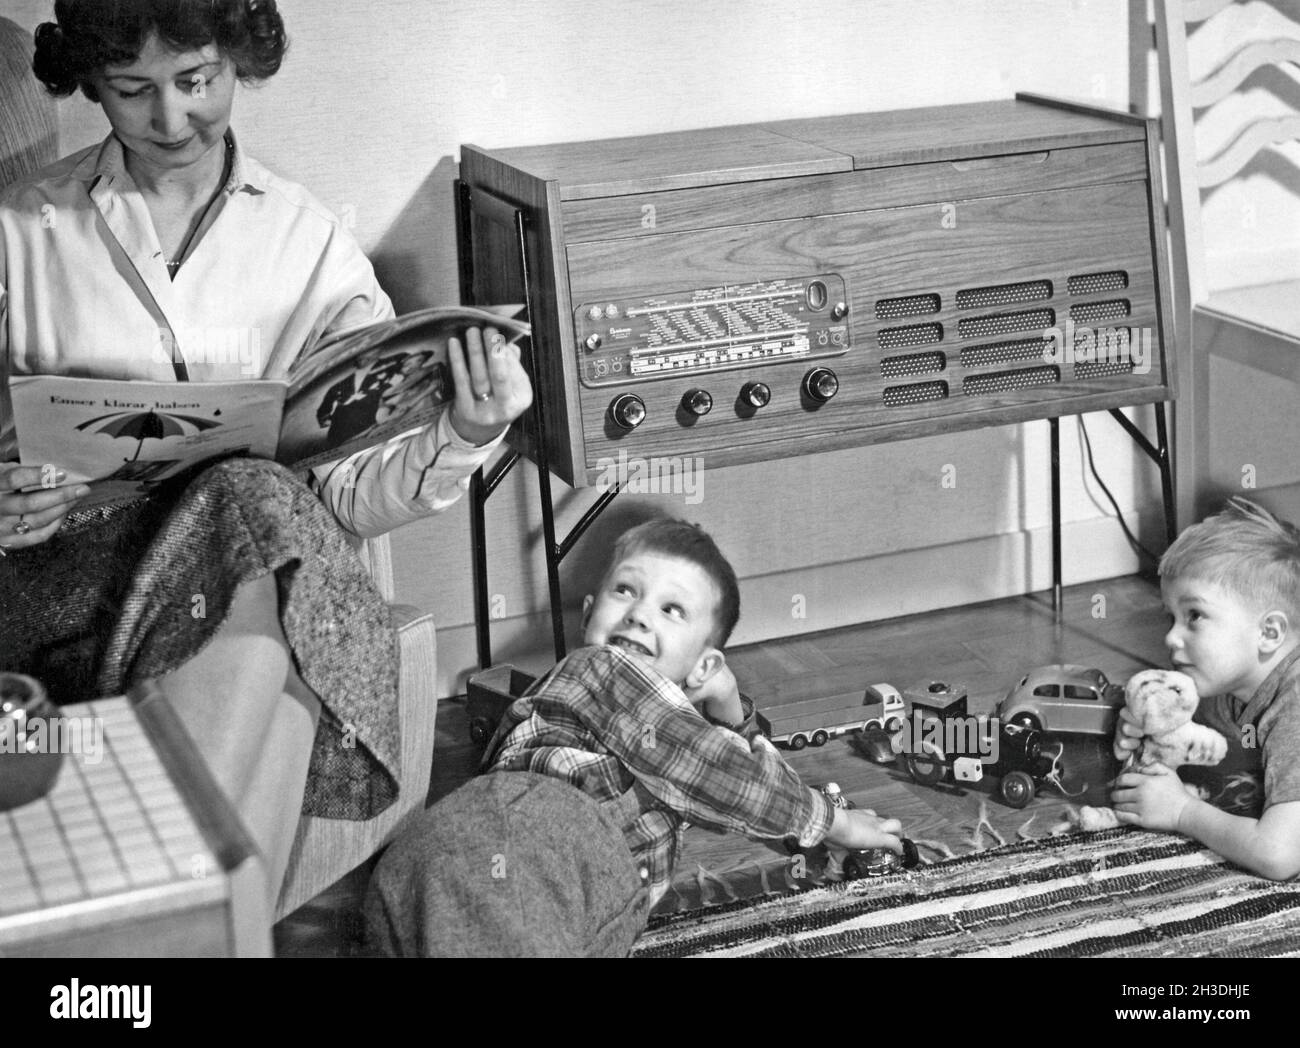 In the 1950s. A mother is seen sitting reading a magazine in her home while her sons are playing with toy cars on the floor. A typical 1950s radio-recordplayer with a wooden cabinet is seen. Sweden 1957 Stock Photo